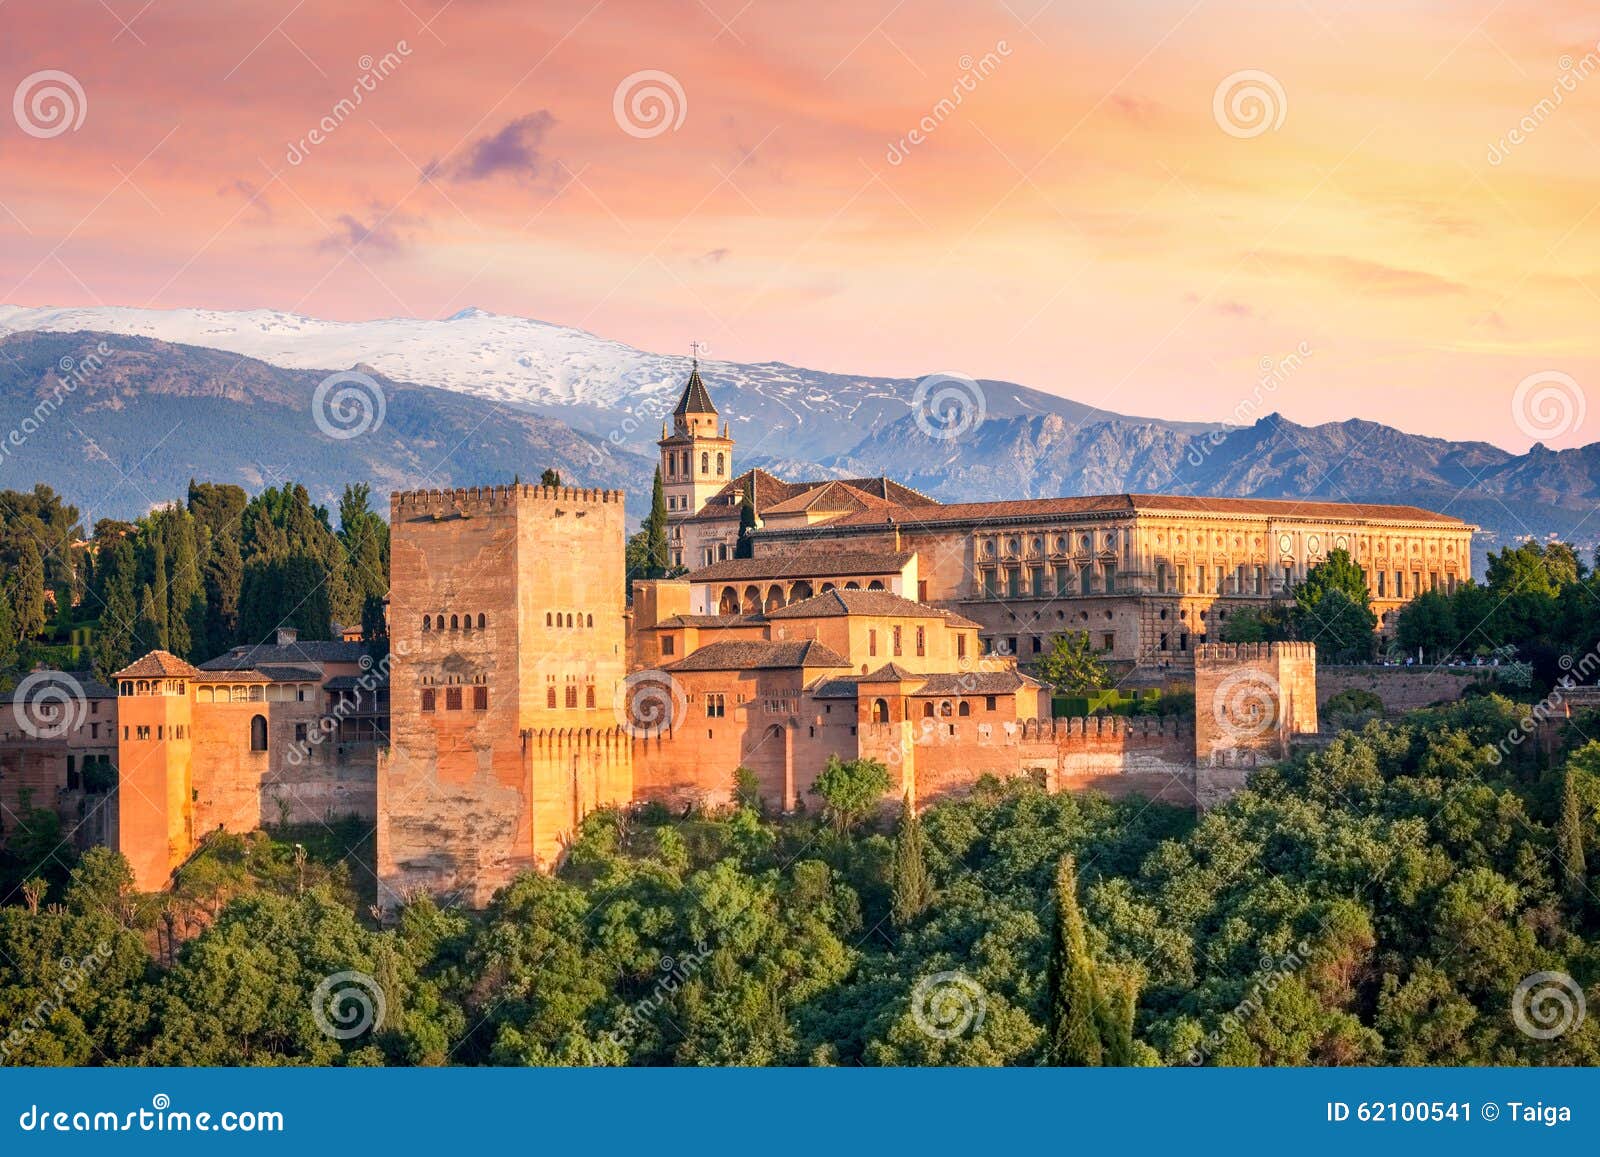 ancient arabic fortress alhambra at the beautiful evening time